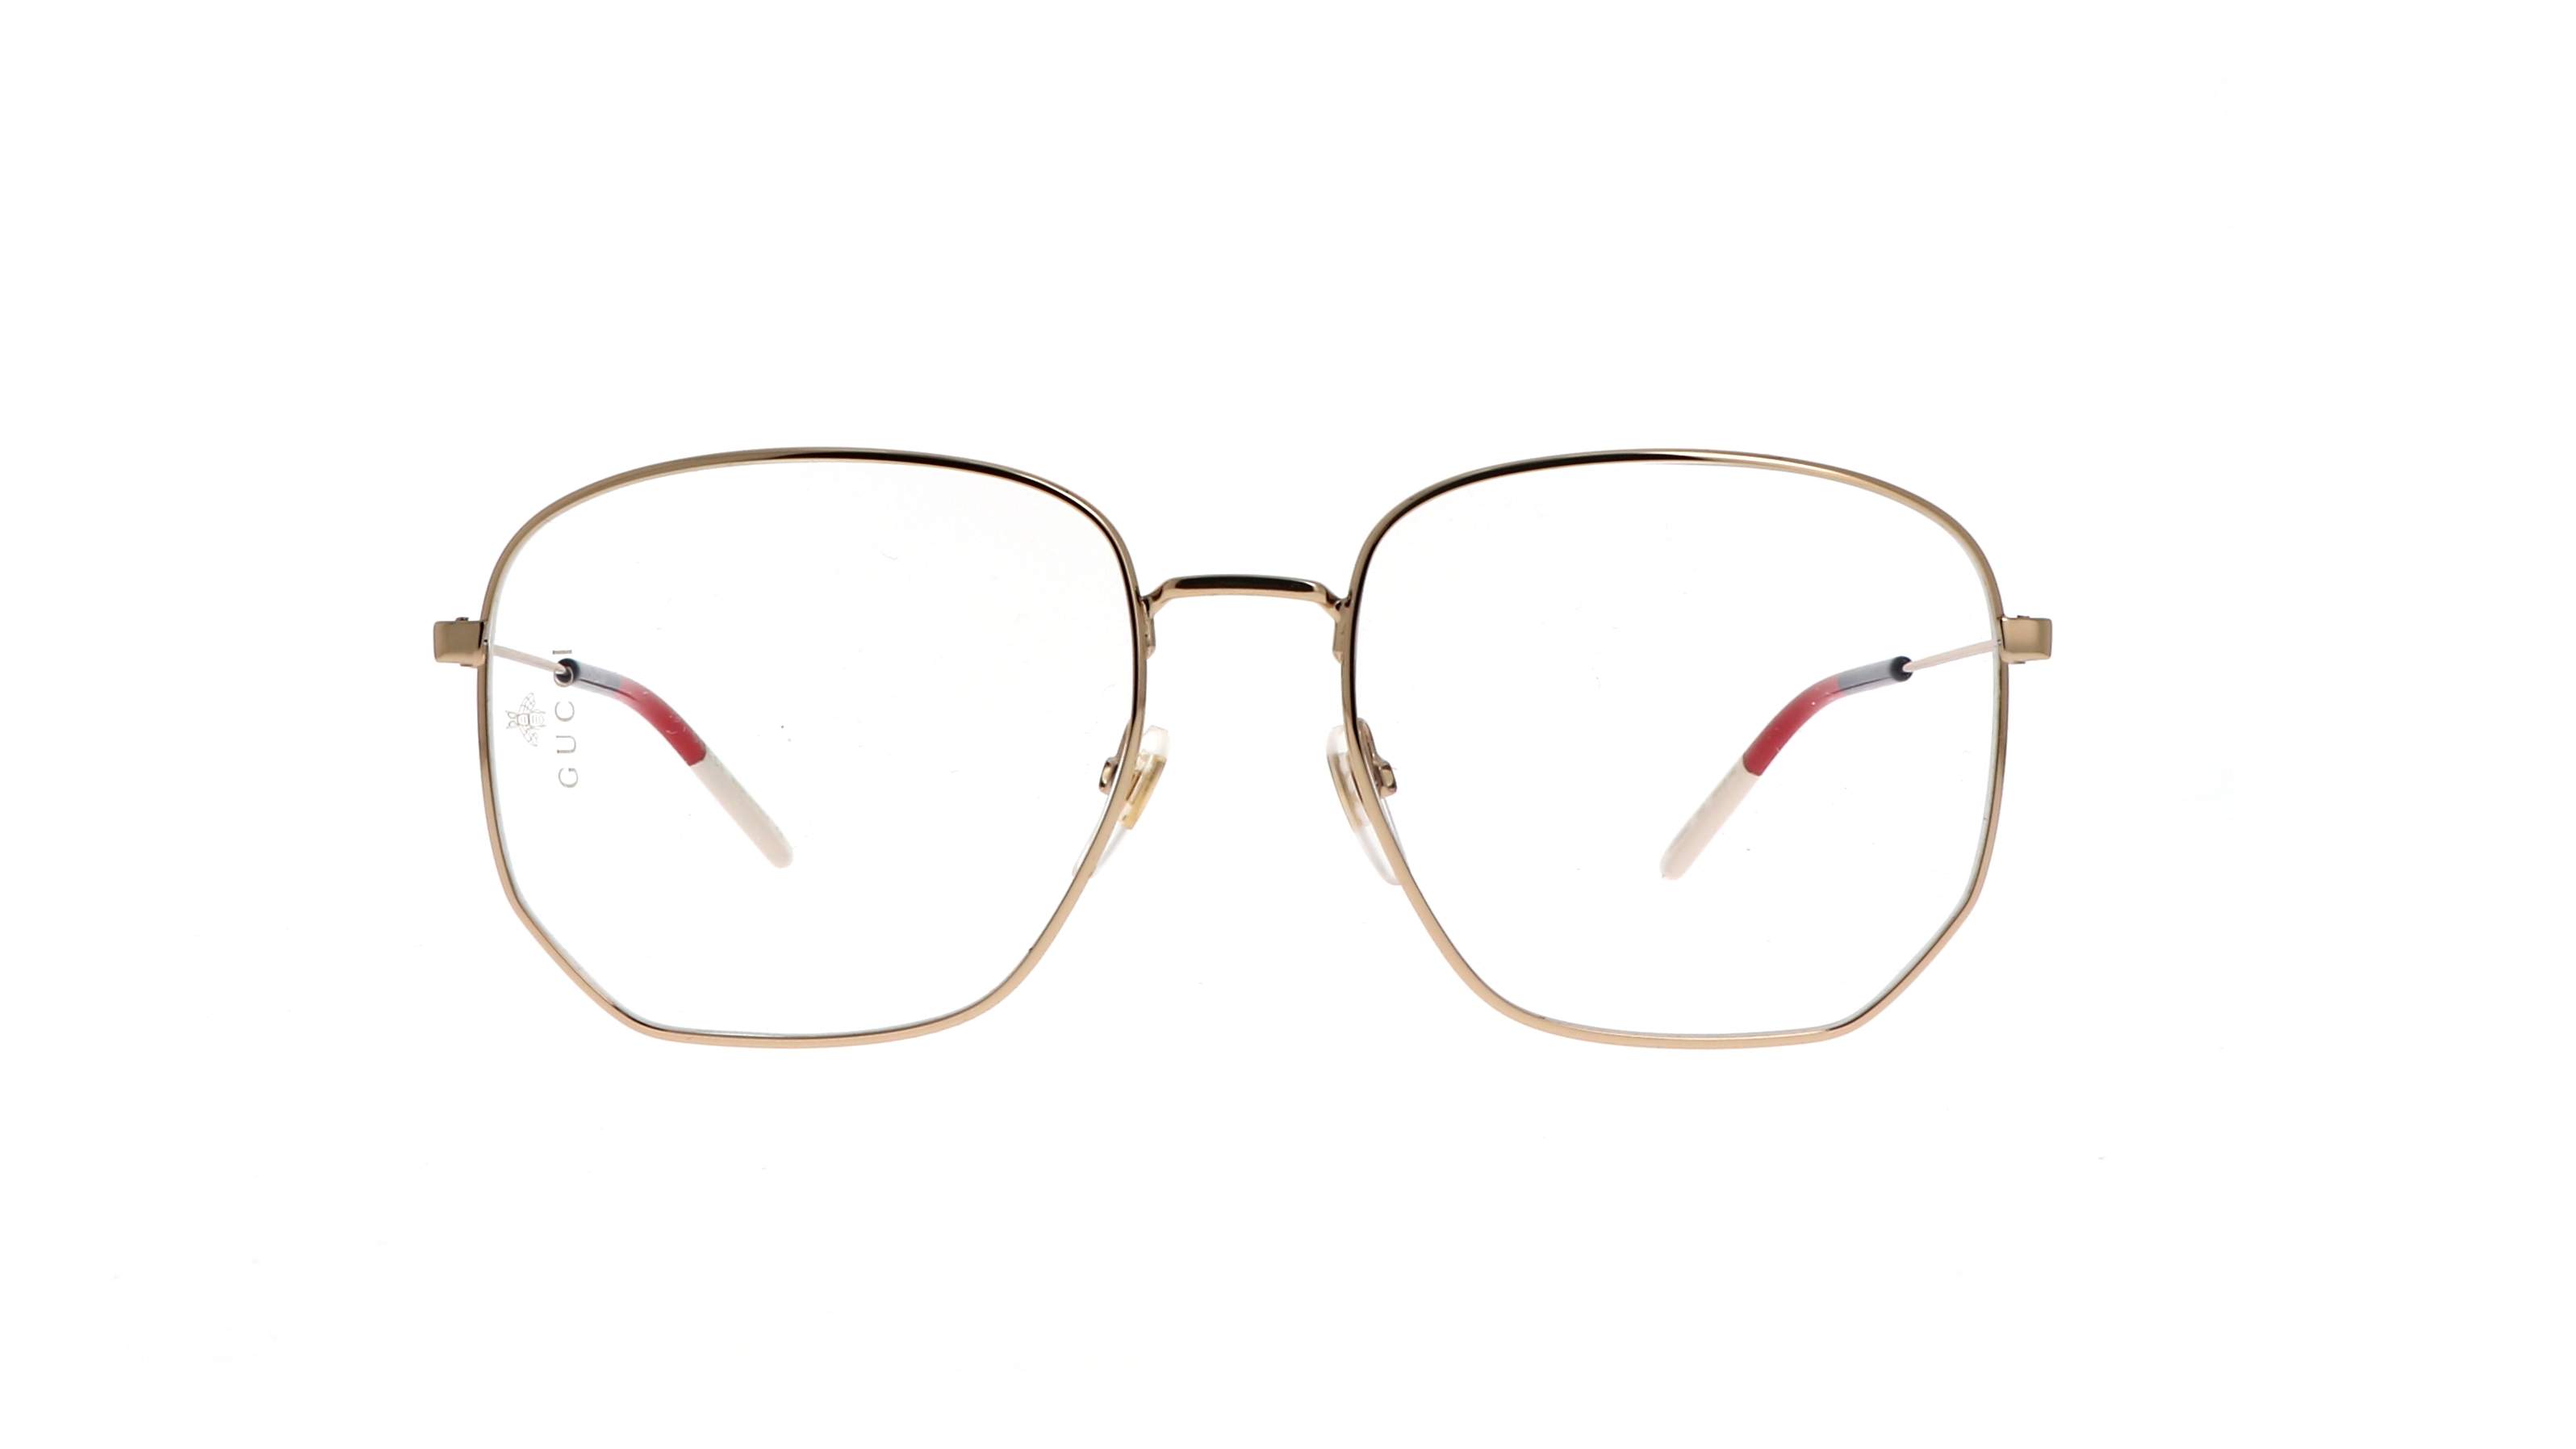 Eyeglasses Gucci Gg0396o 002 56 18 Gold In Stock Price Chf 17800 Visiofactory